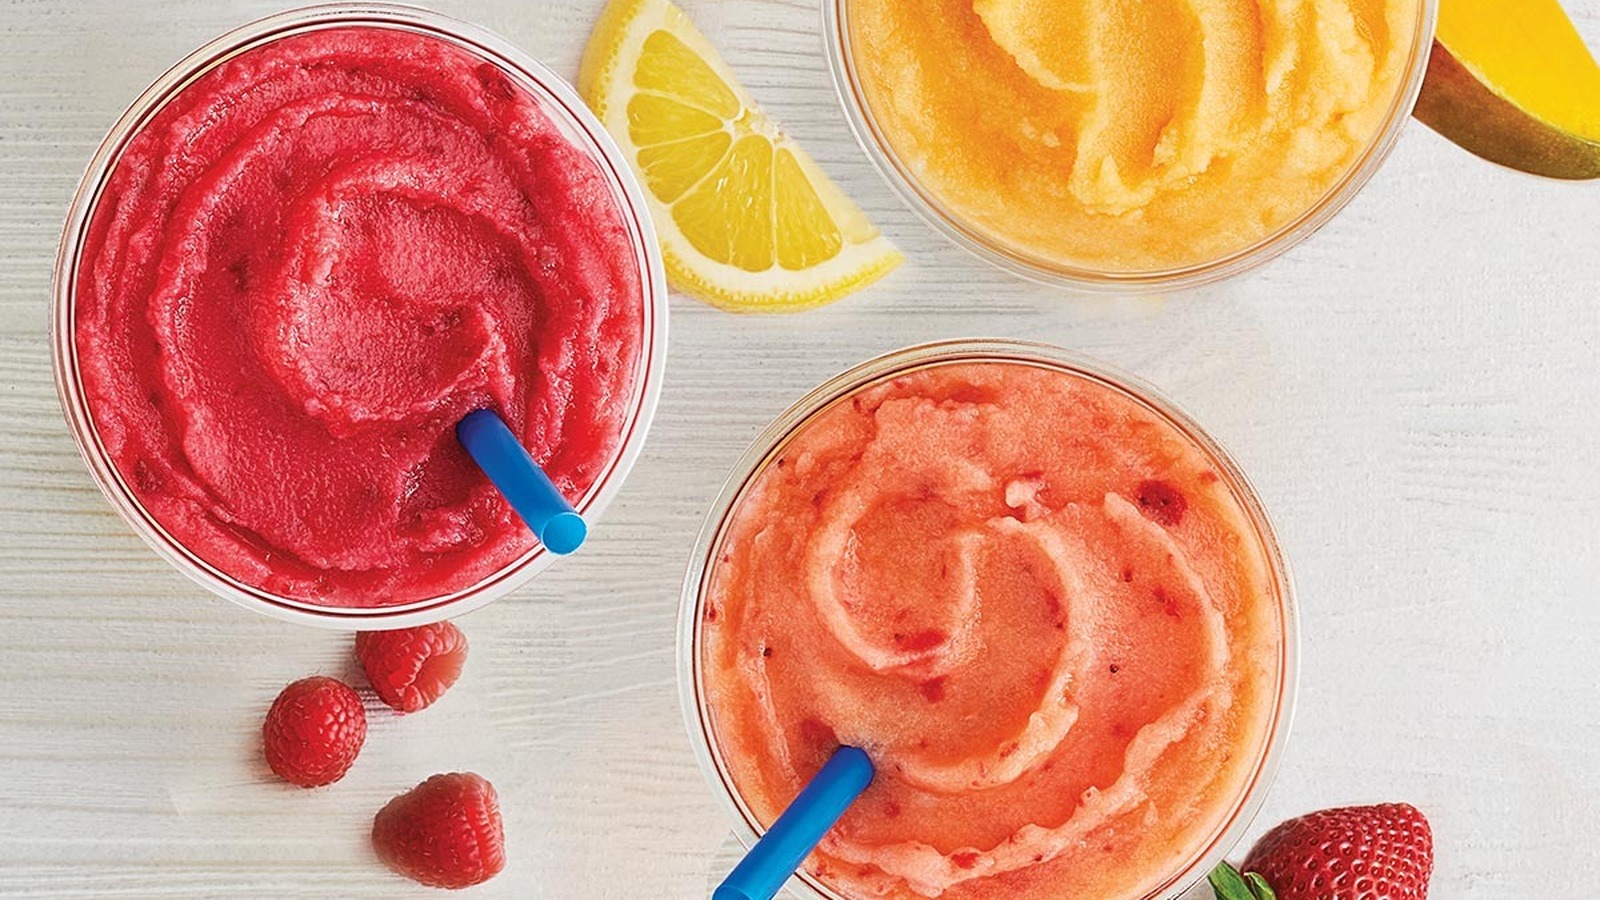 Culver's Lemon Ice Is Back In Time For Summer With 6 Fruity Flavors